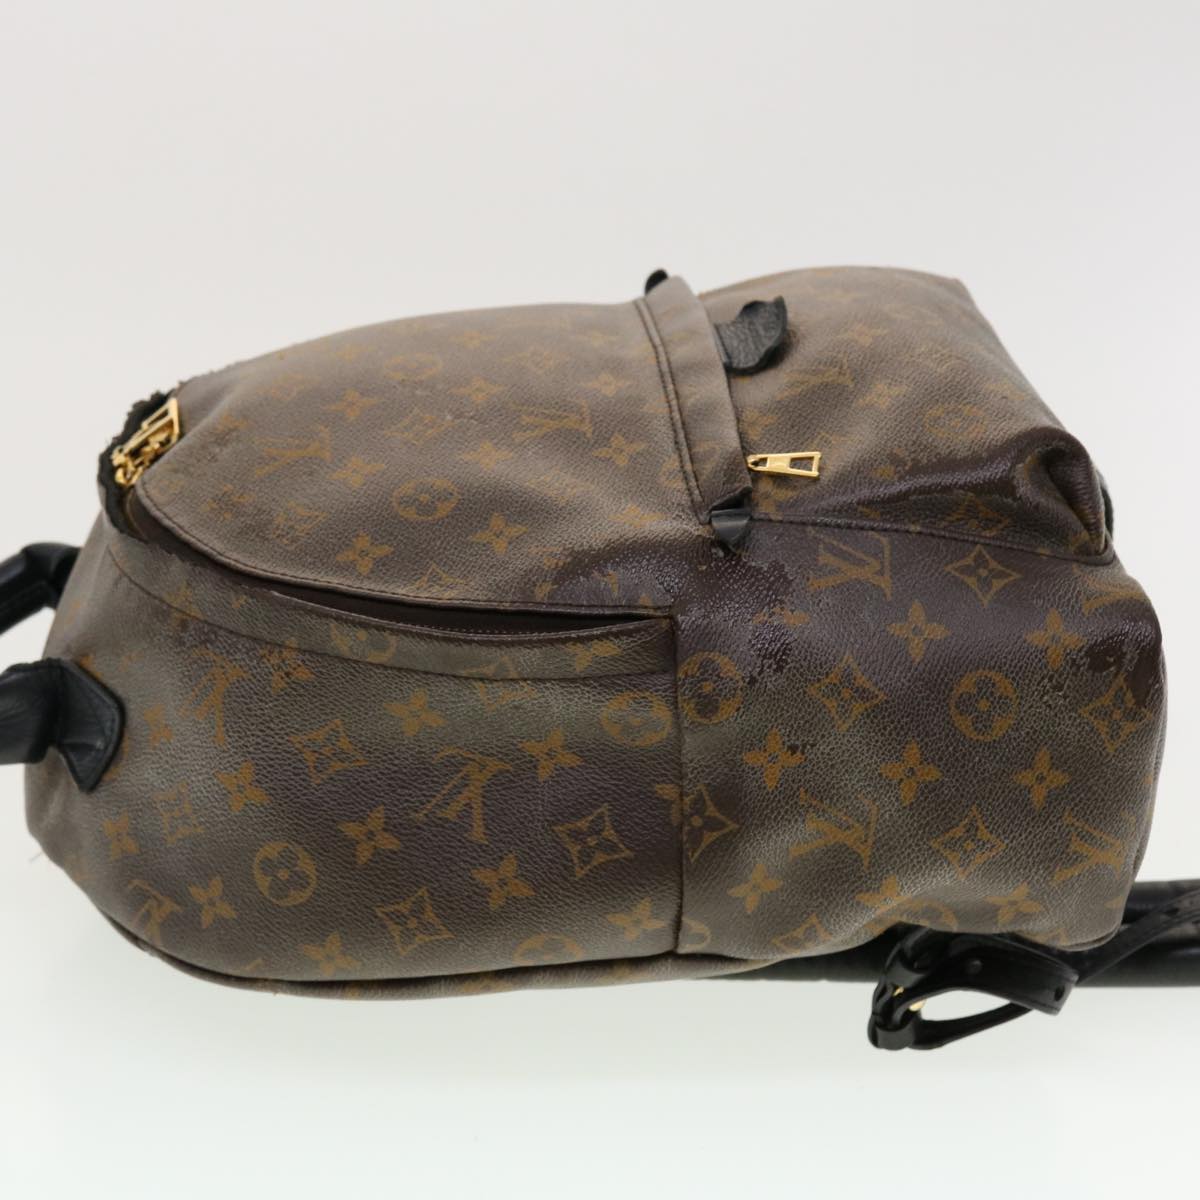 LOUIS VUITTON Monogram Palm Springs MM Backpack M44874 LV Auth bs5175